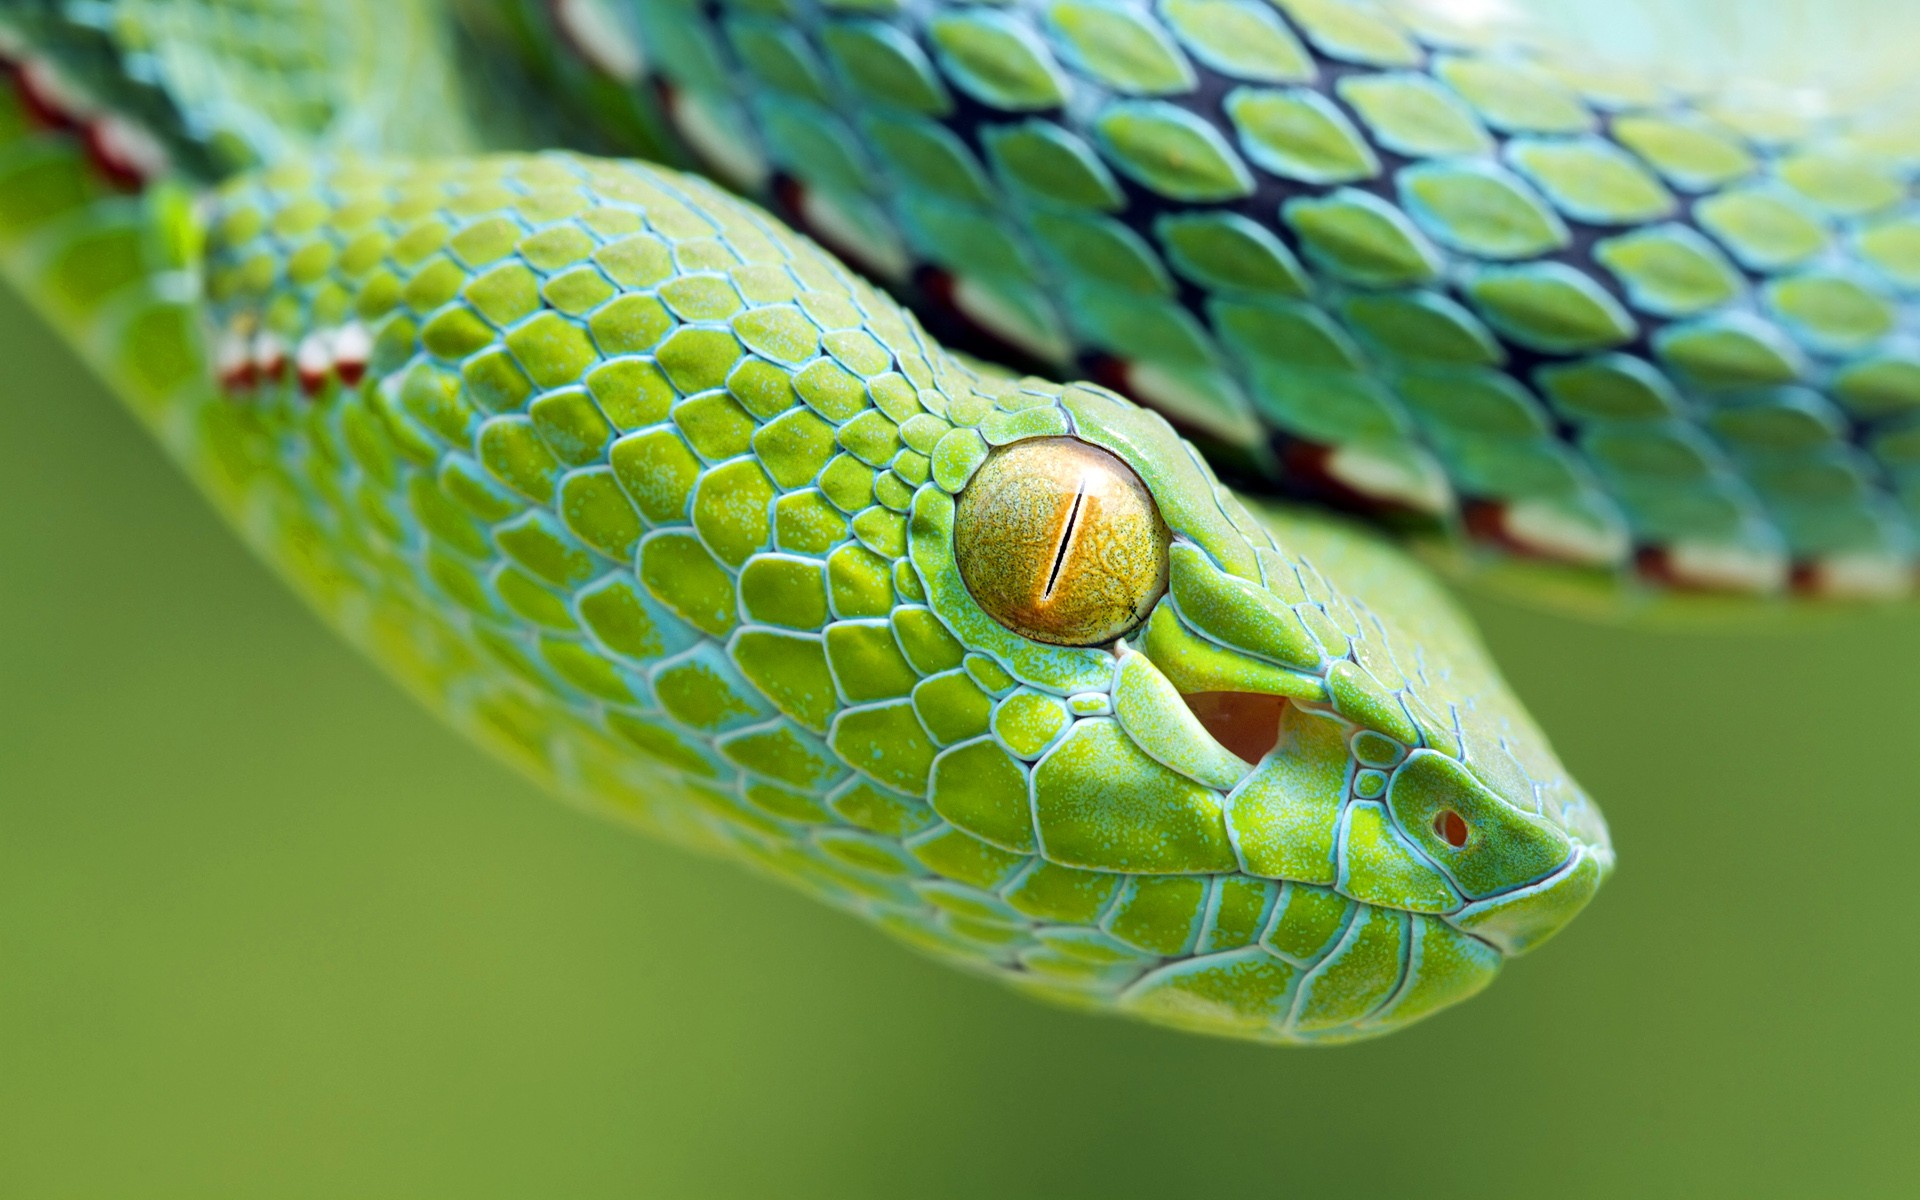 Animals Reptiles Vipers Green Vibrant Yellow Eyes Scales Snake Serpent 1920x1200